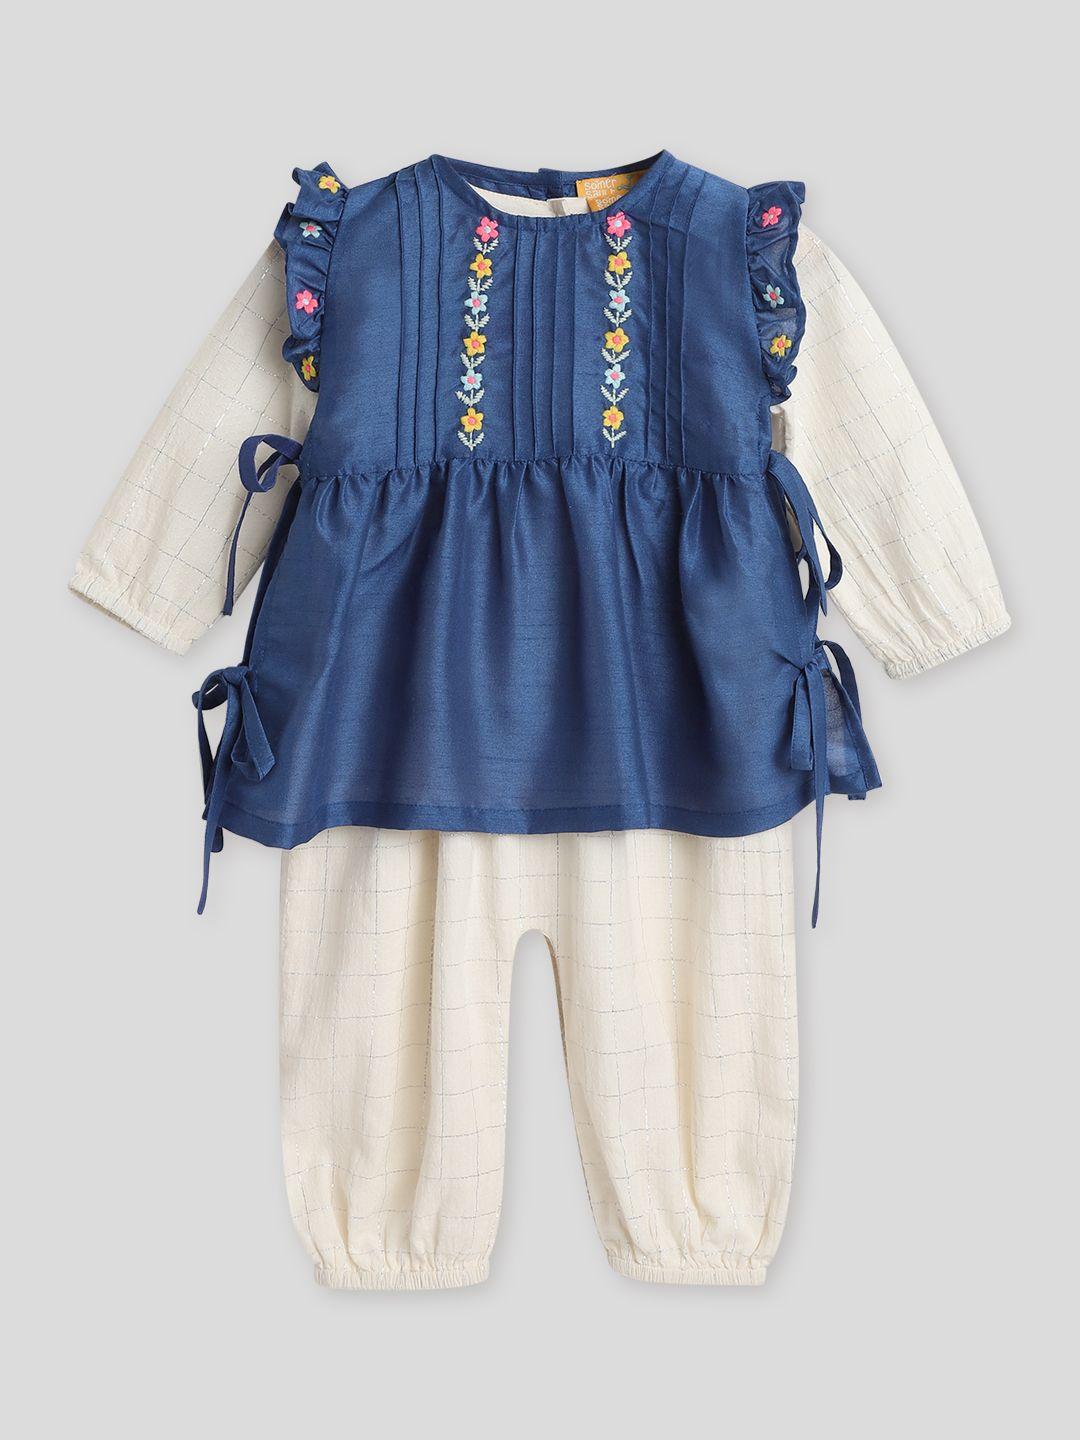 somersault infants girls embroidered romper with apron dress